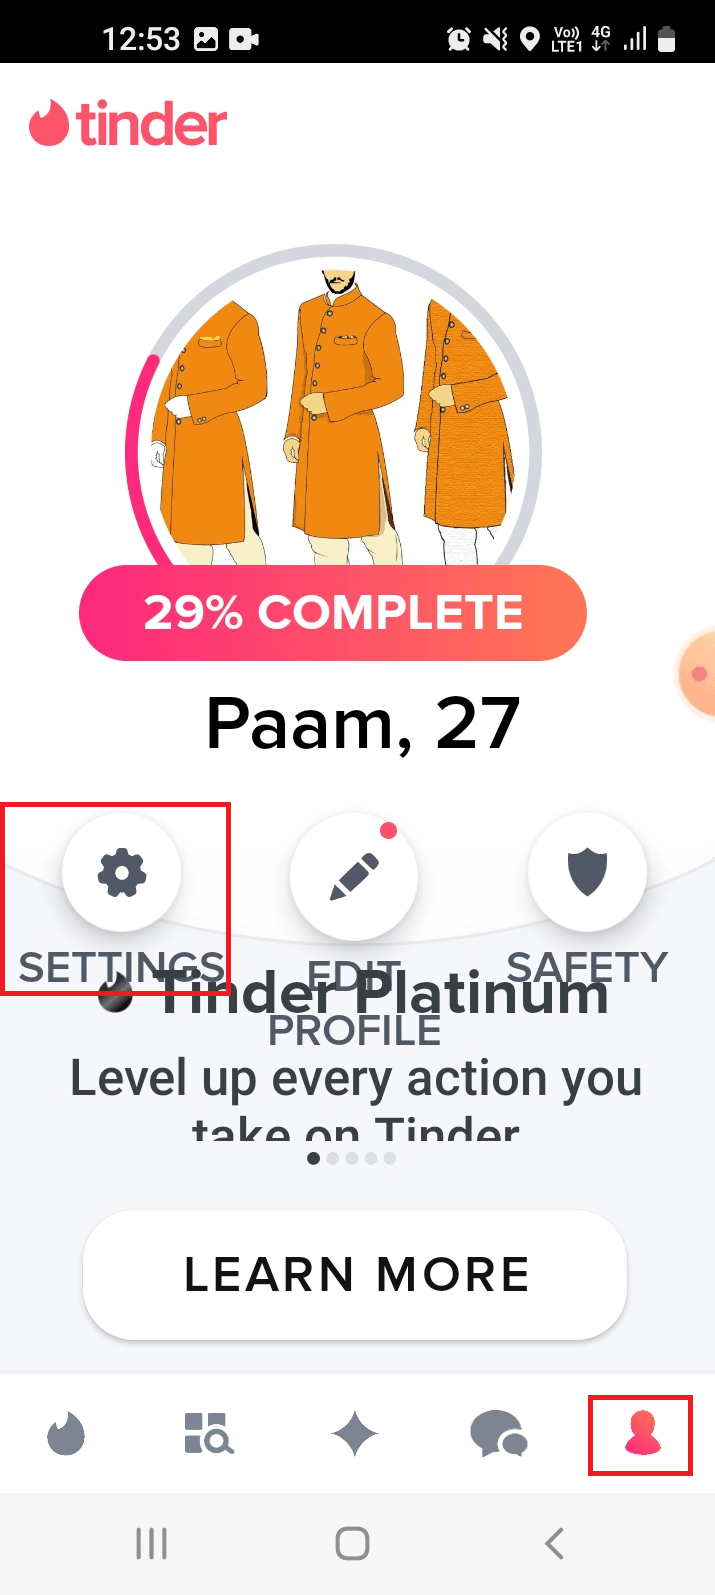 Navigate to the Profile tab and tap on the SETTINGS icon